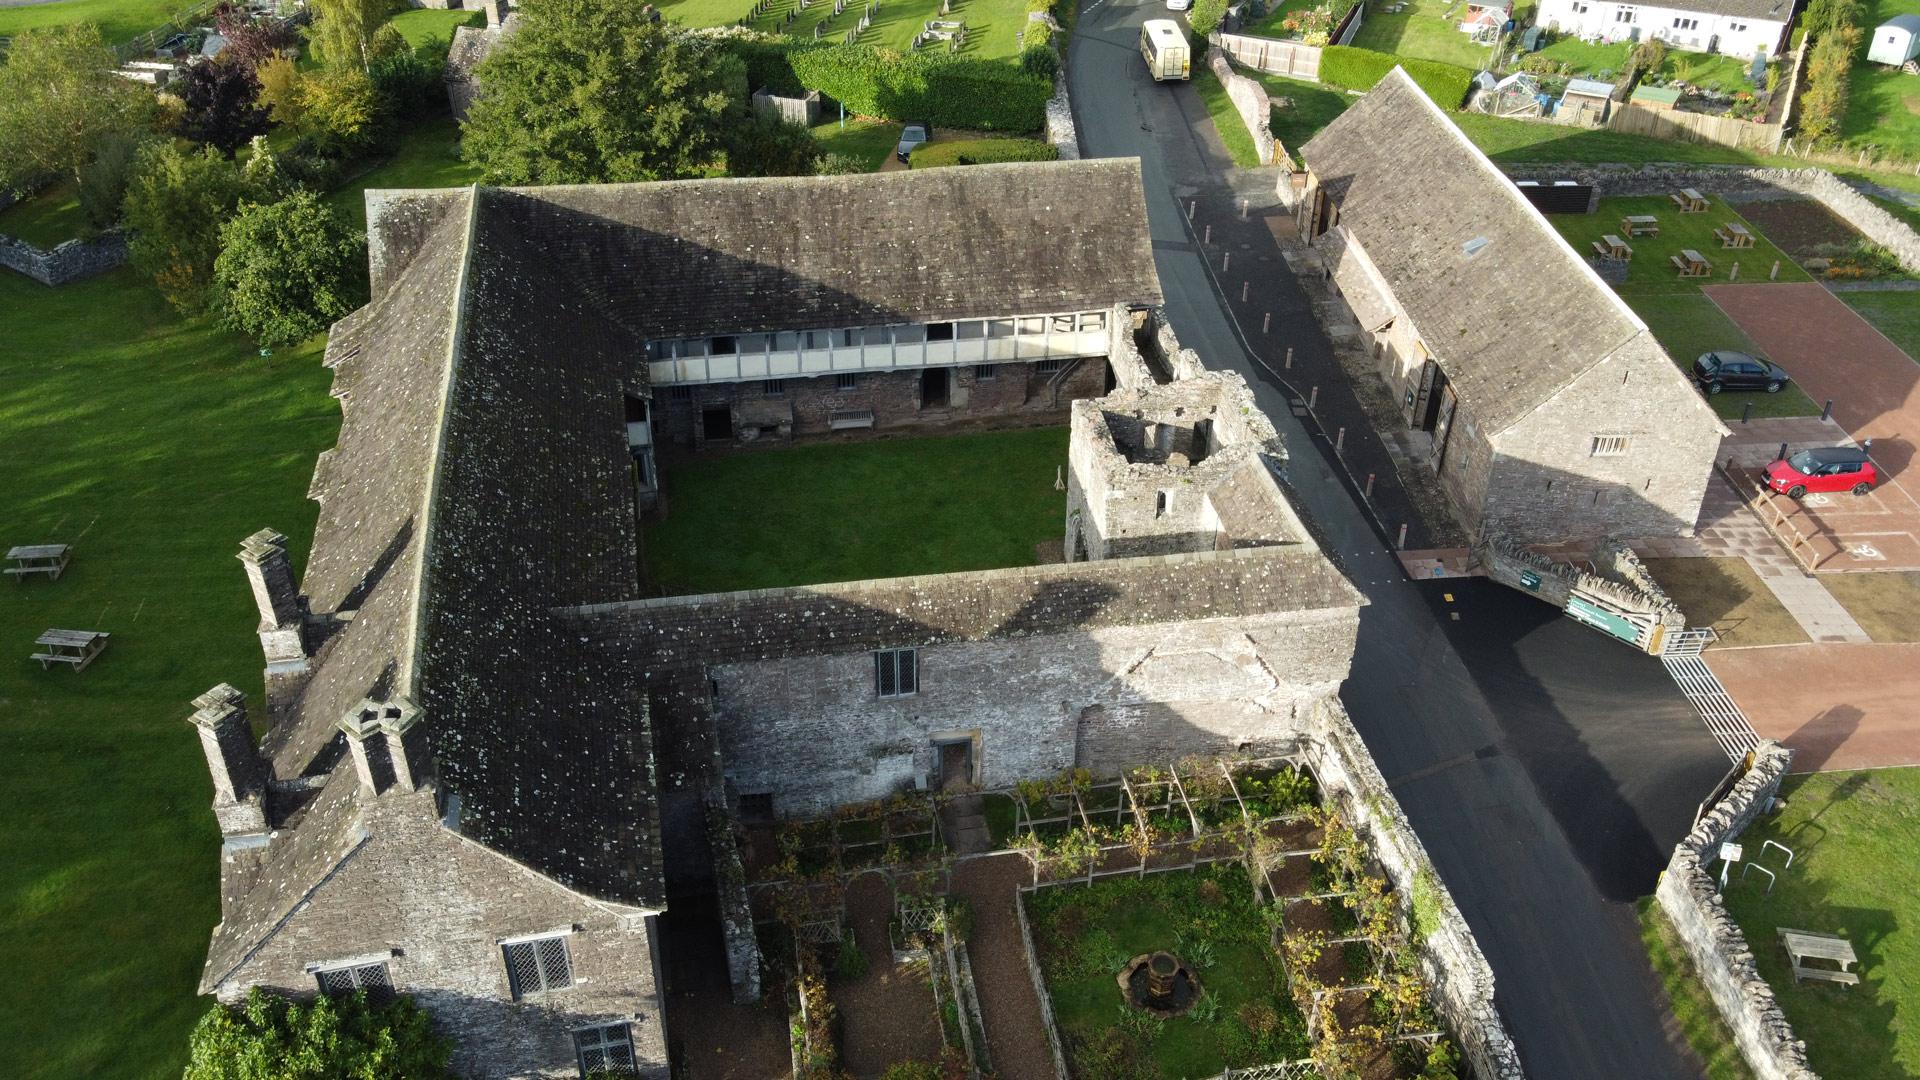 Llys a Chastell Tretwr / Tretower Court and Castle aerial view